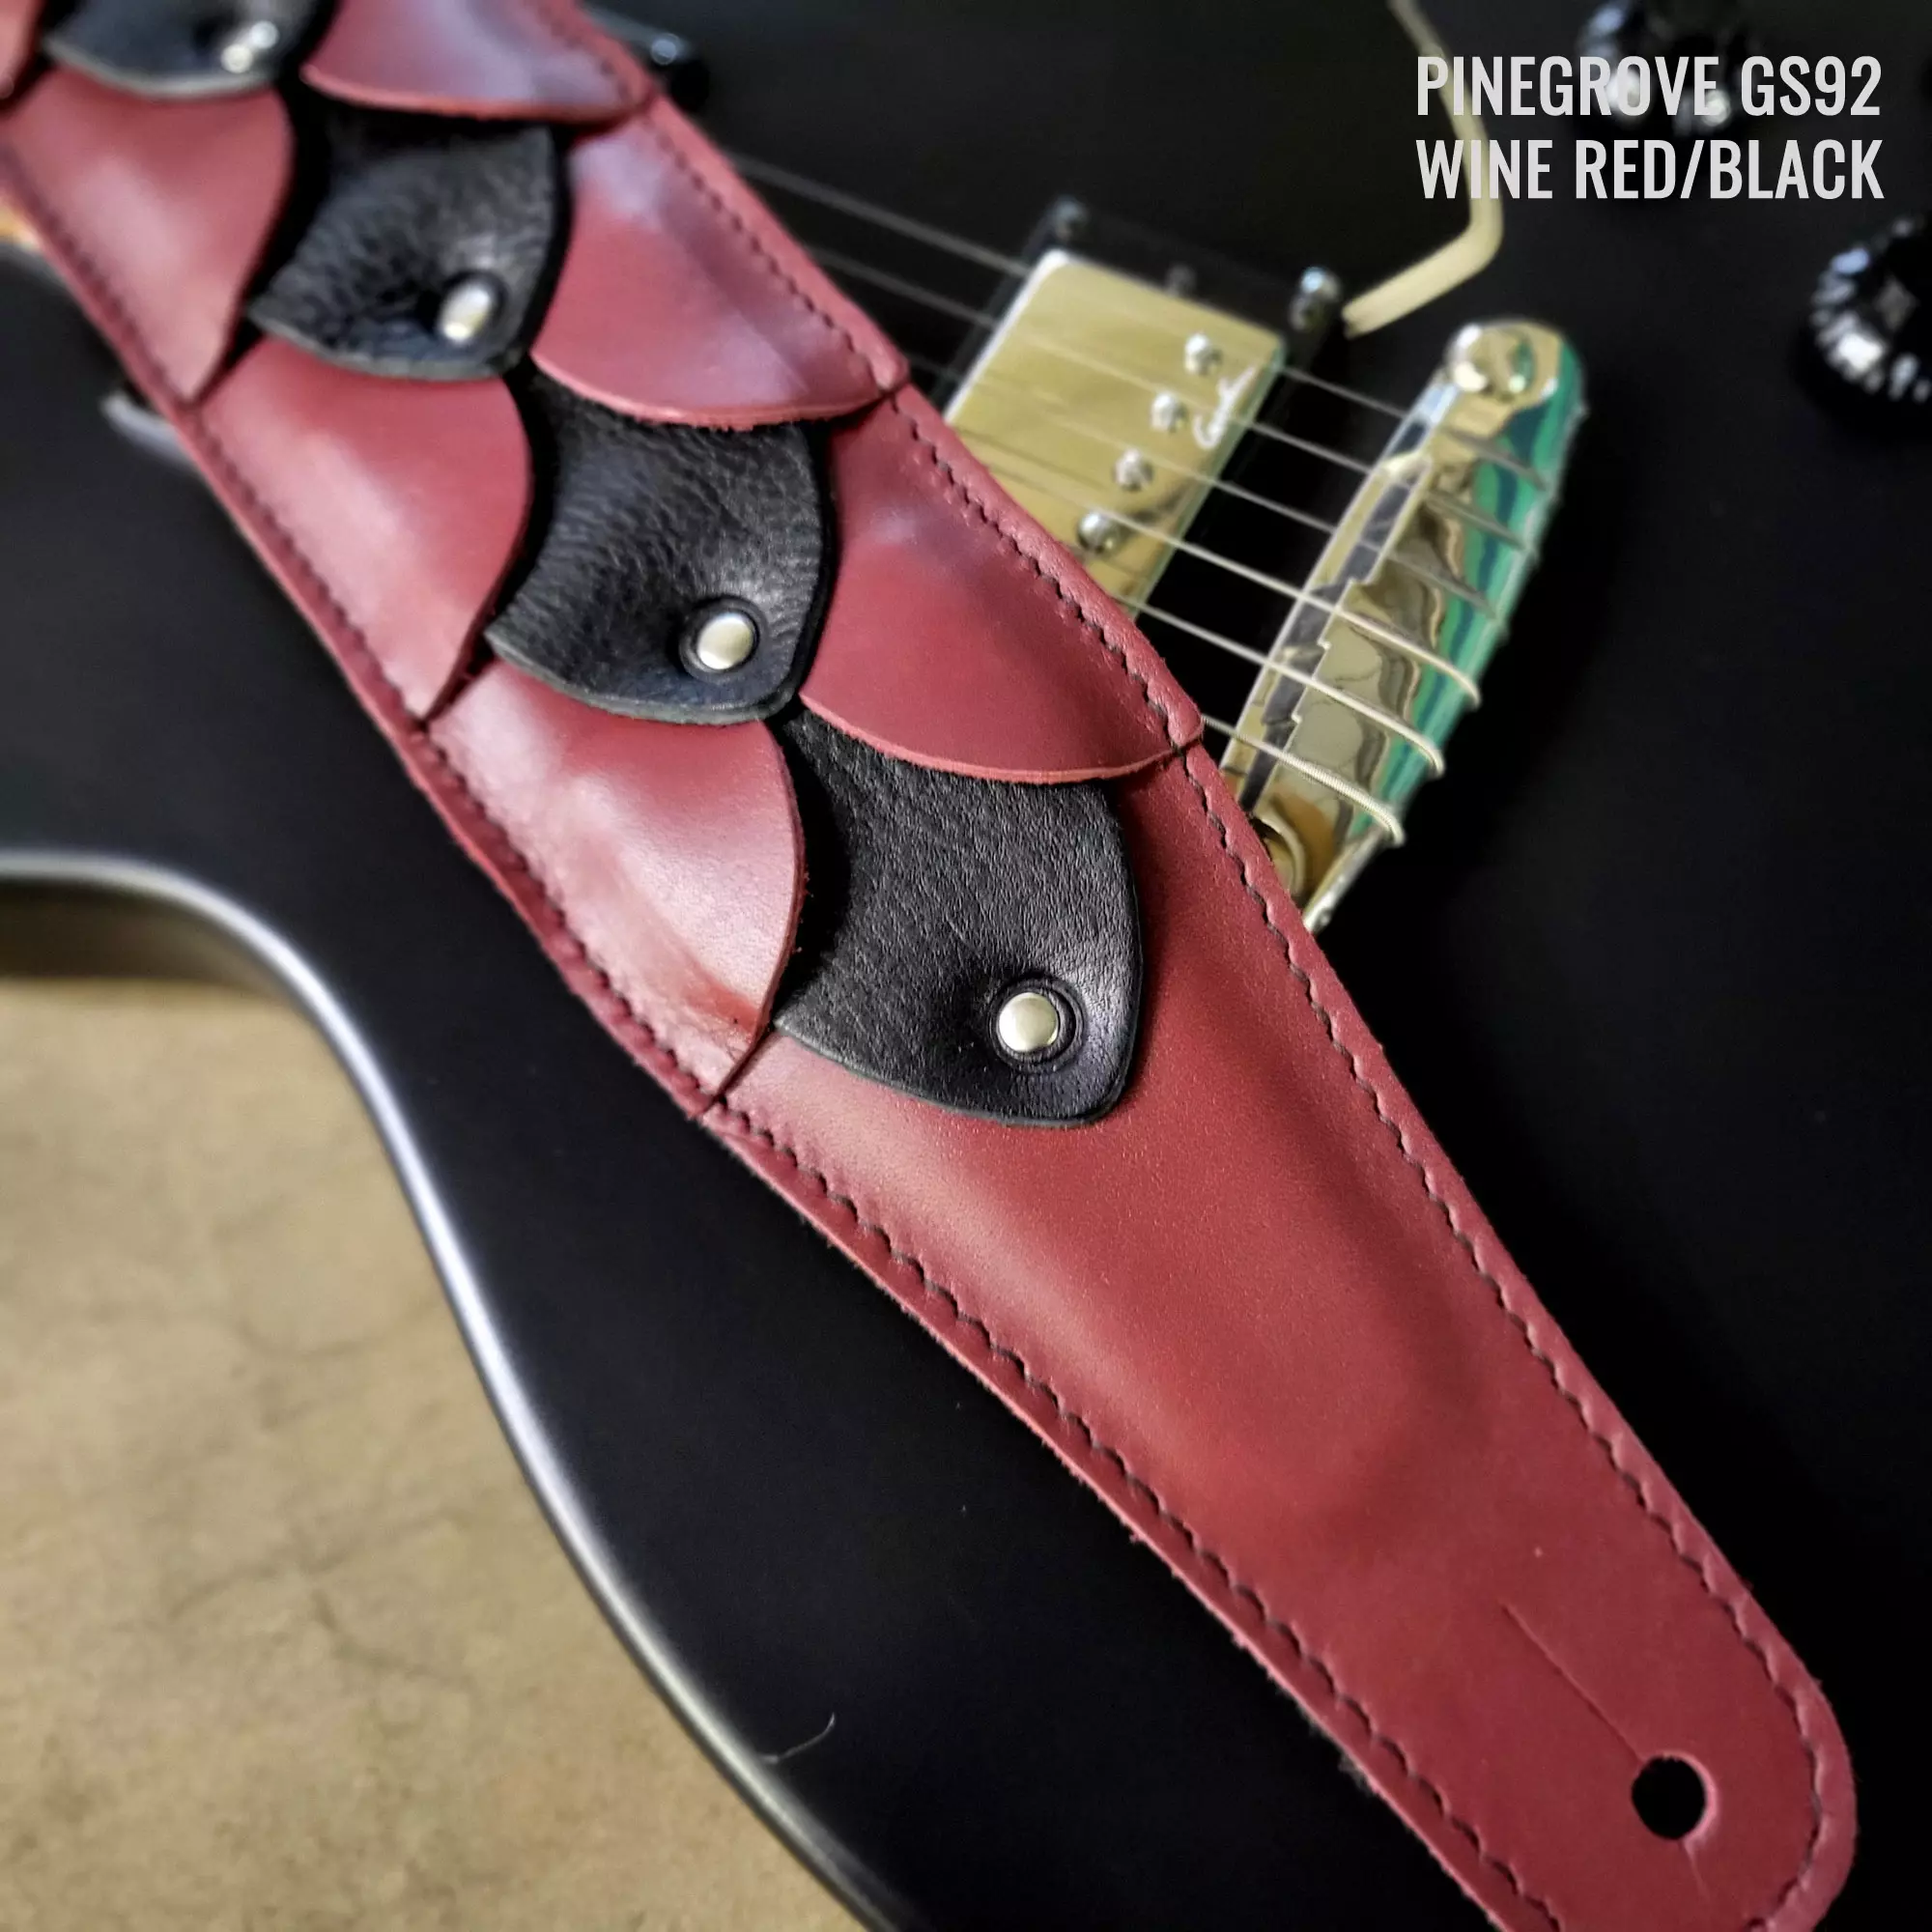 GS92 wine red and black Pinegrove 738.jpg